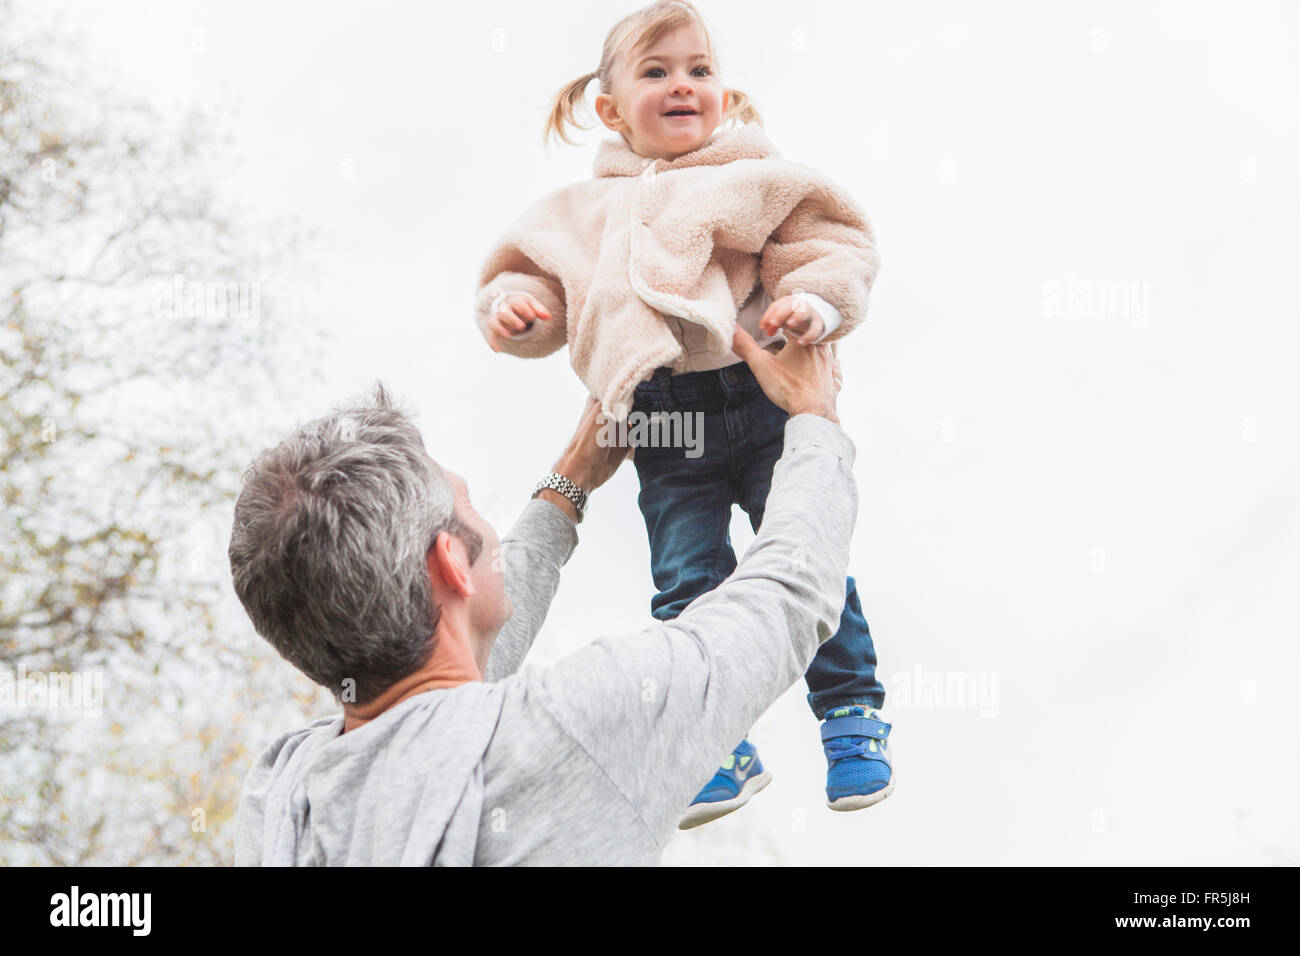 Father lifting toddler daughter overhead Stock Photo